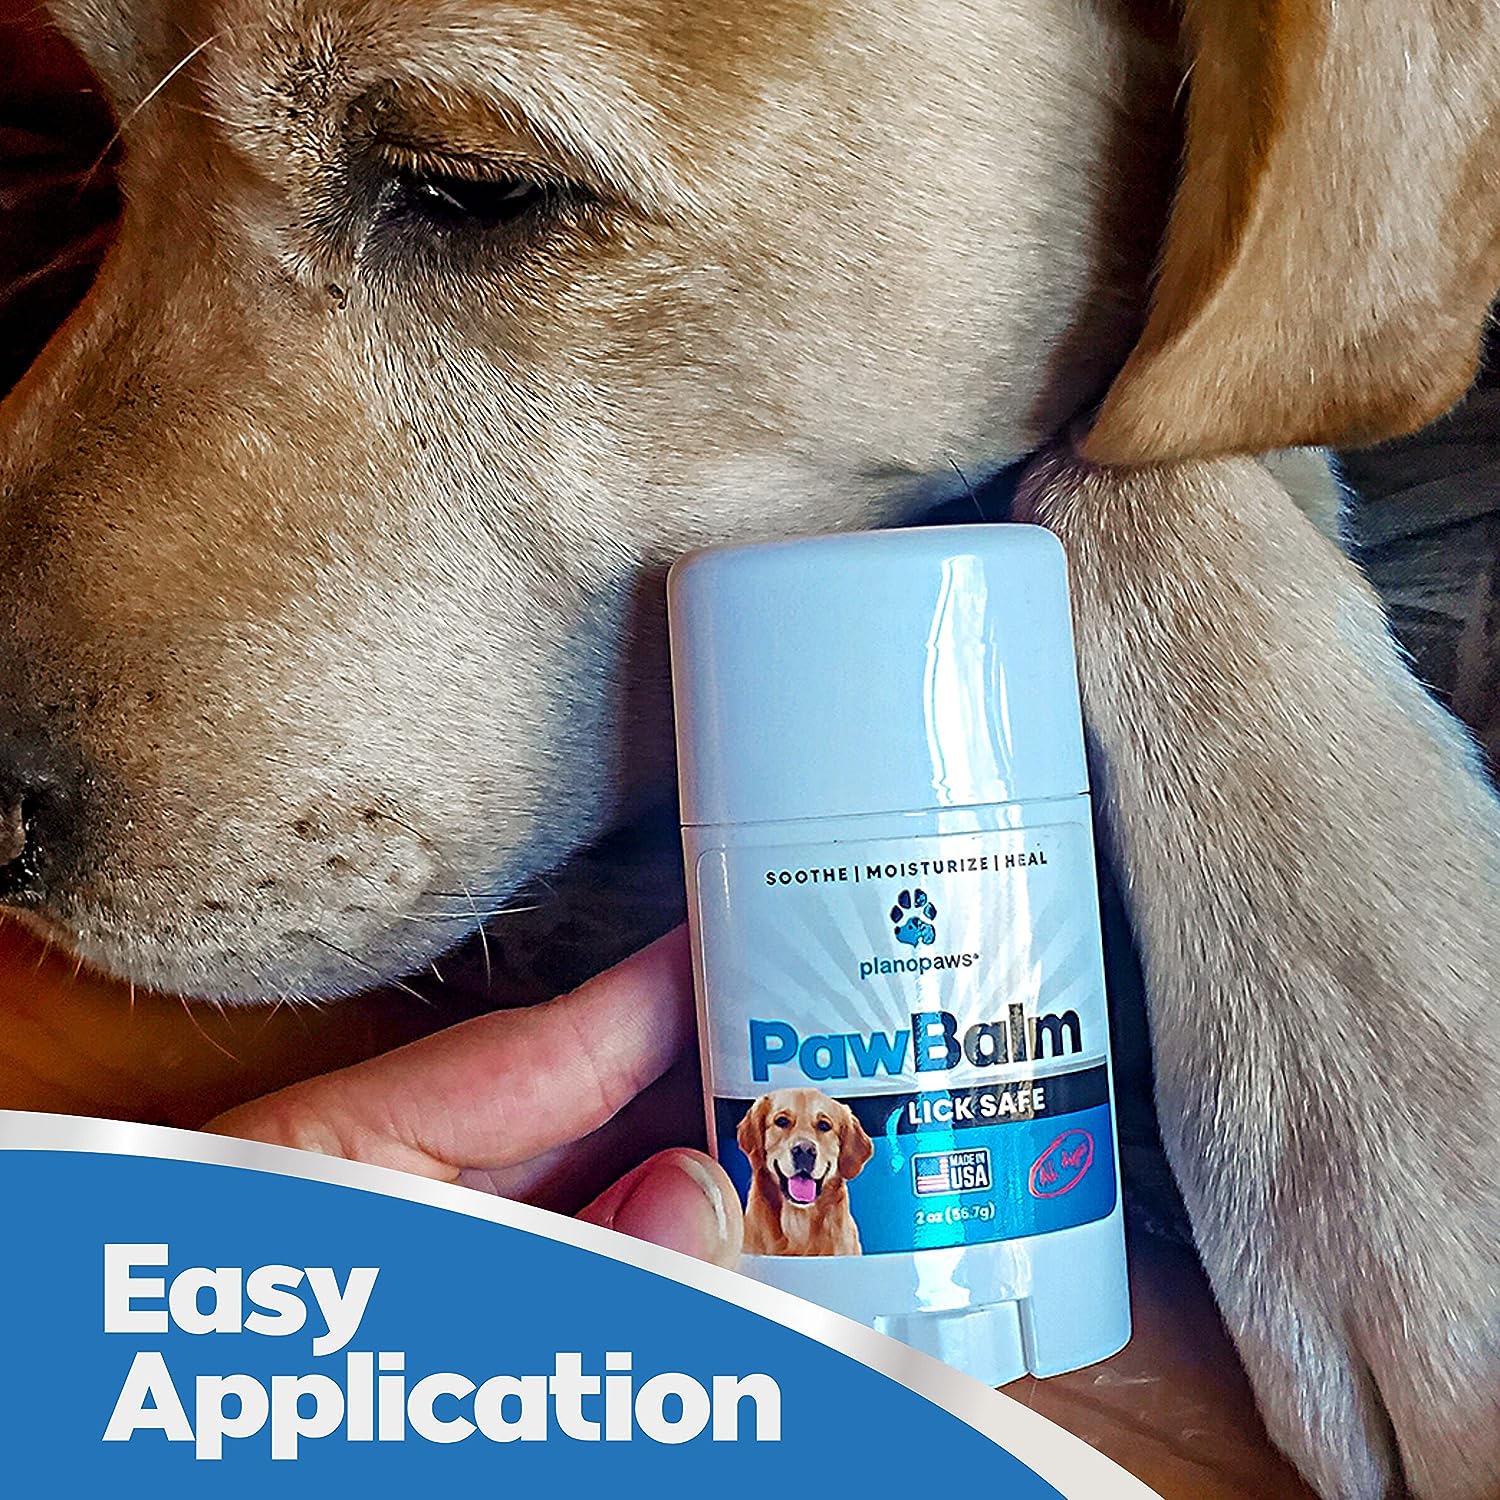 Lick Safe Dog Paw Balm 2 Oz - Dog Paw Protector - Paw Balm Dogs - Paw Pad Balm - Paw Protectors for Dogs Hot Pavement - Paw Wax for Dogs - Fix Dry Cracked Paws - Paw Soother for Dogs - Paw Butter